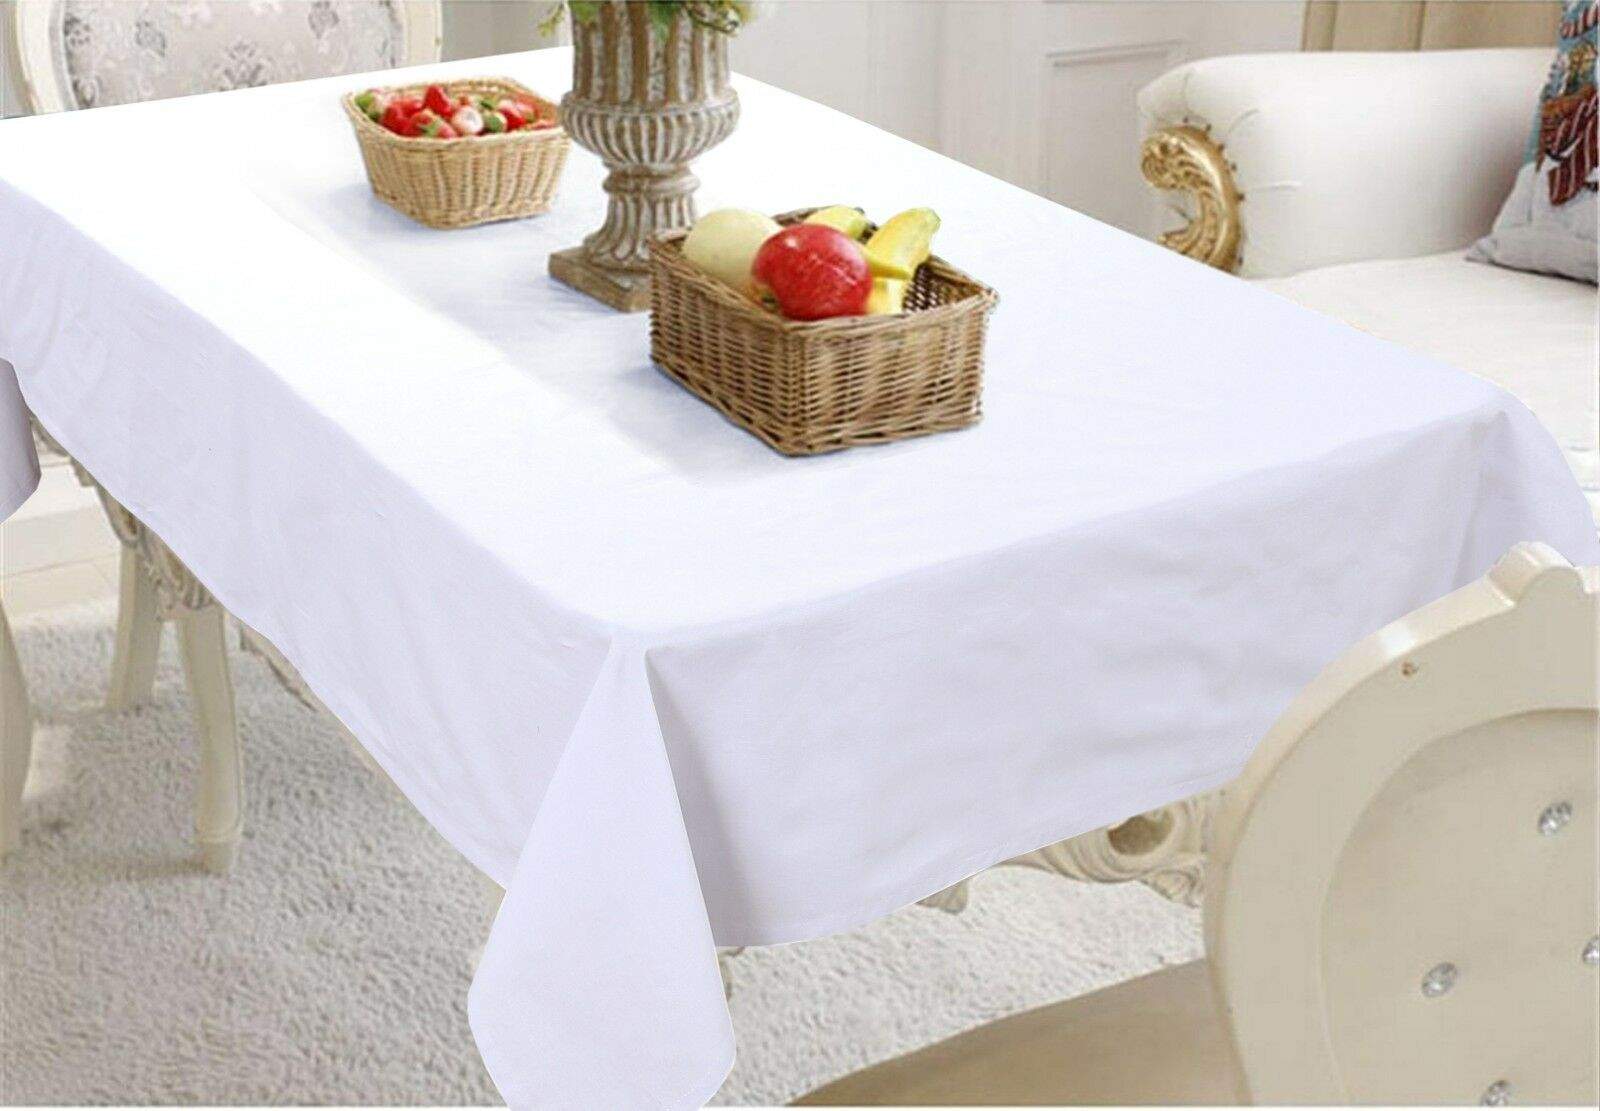 Luxury White 100% Cotton Astra Table Cloth Pack of 5 Bed and Bath Linen